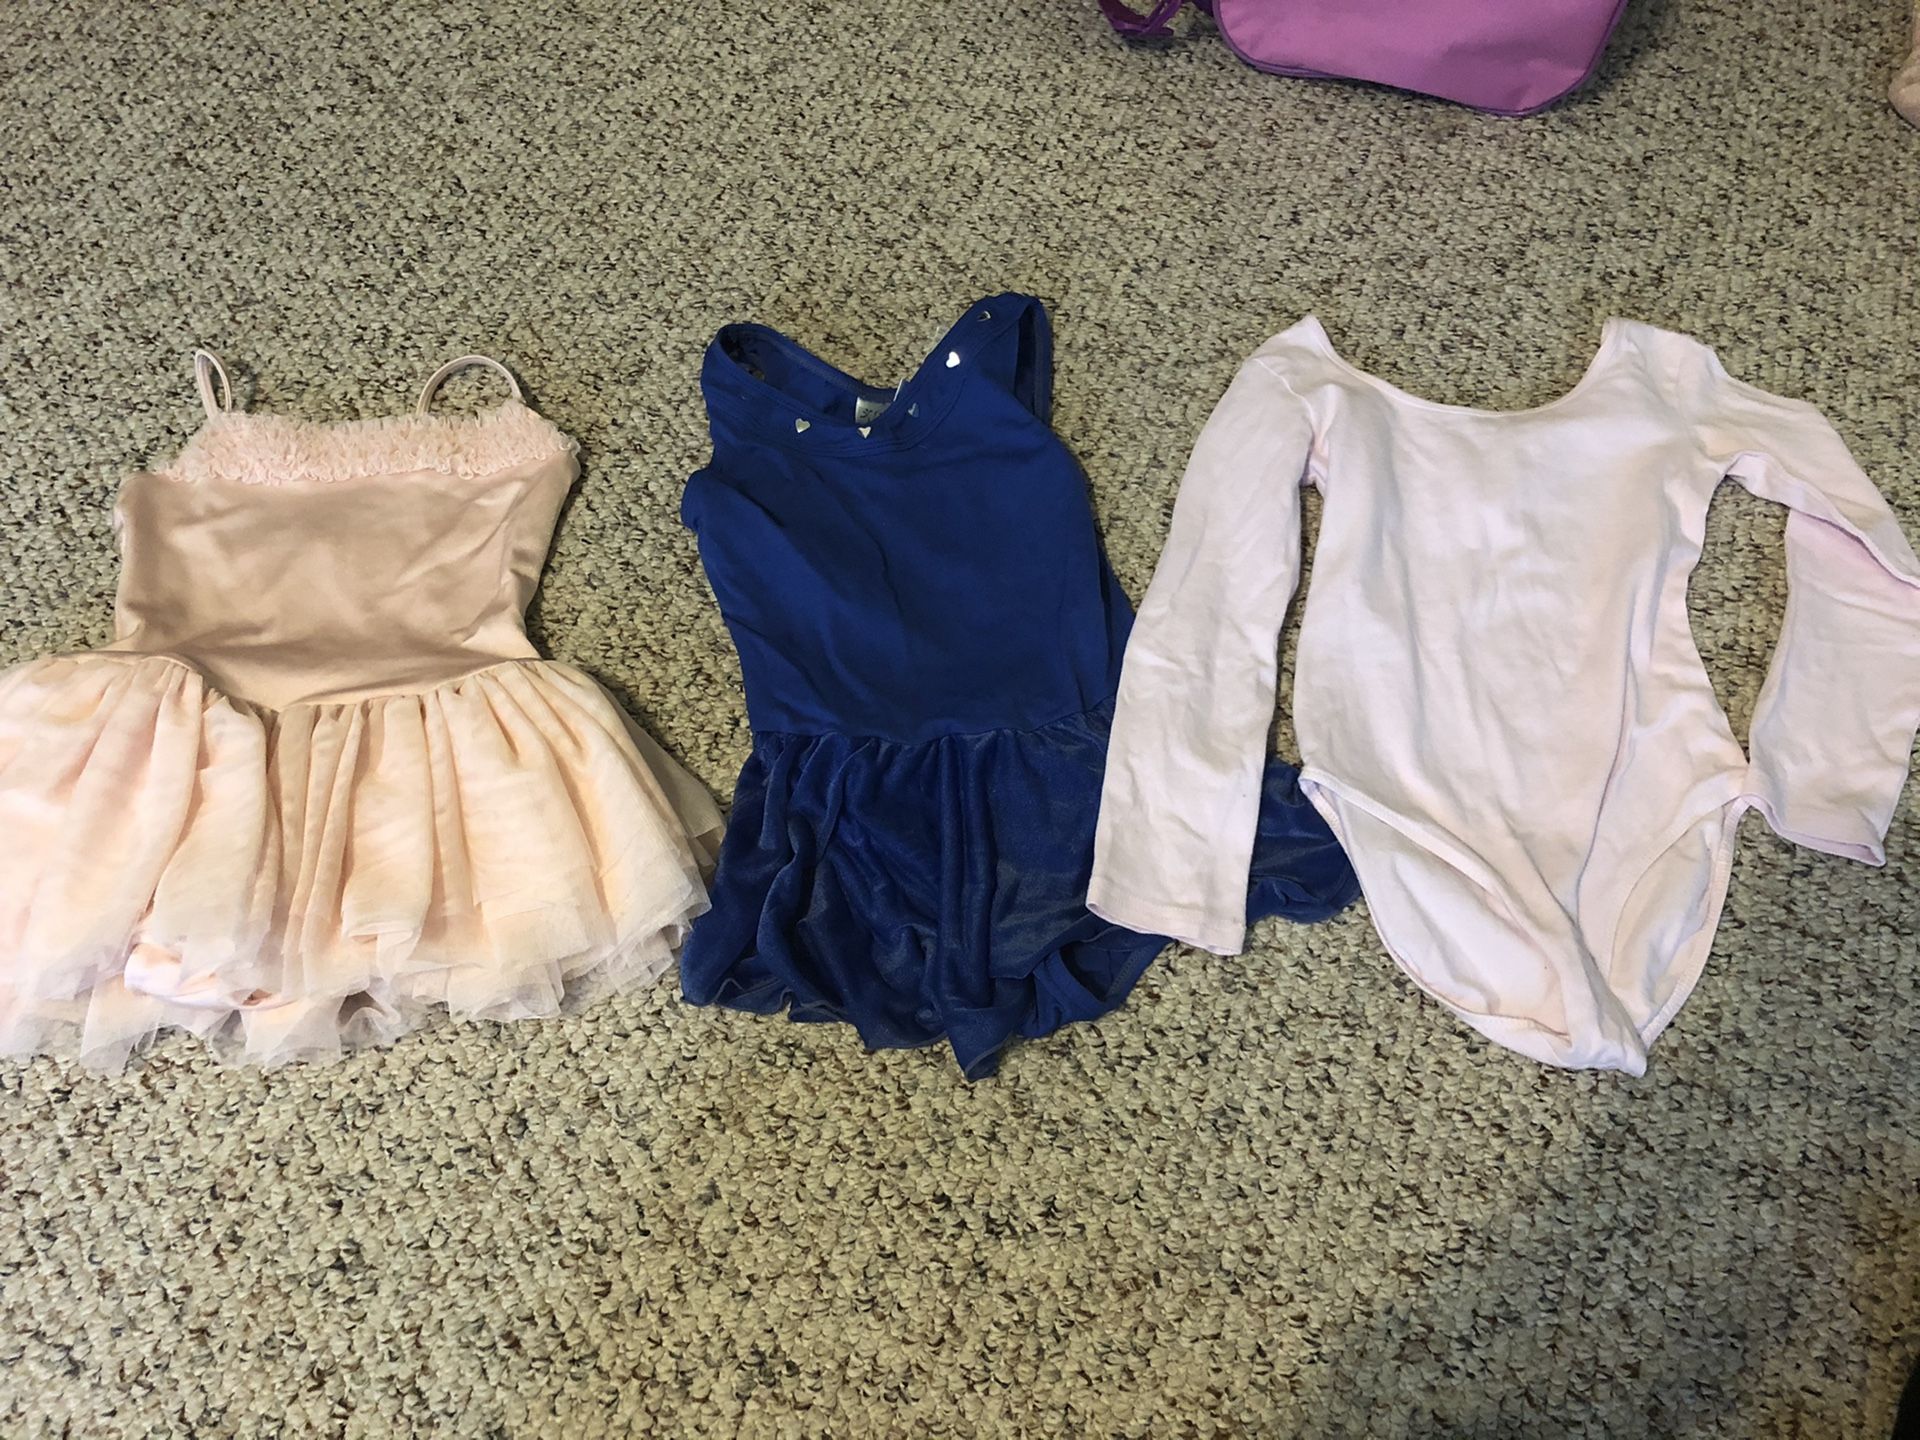 Dance clothes girls size 6-8